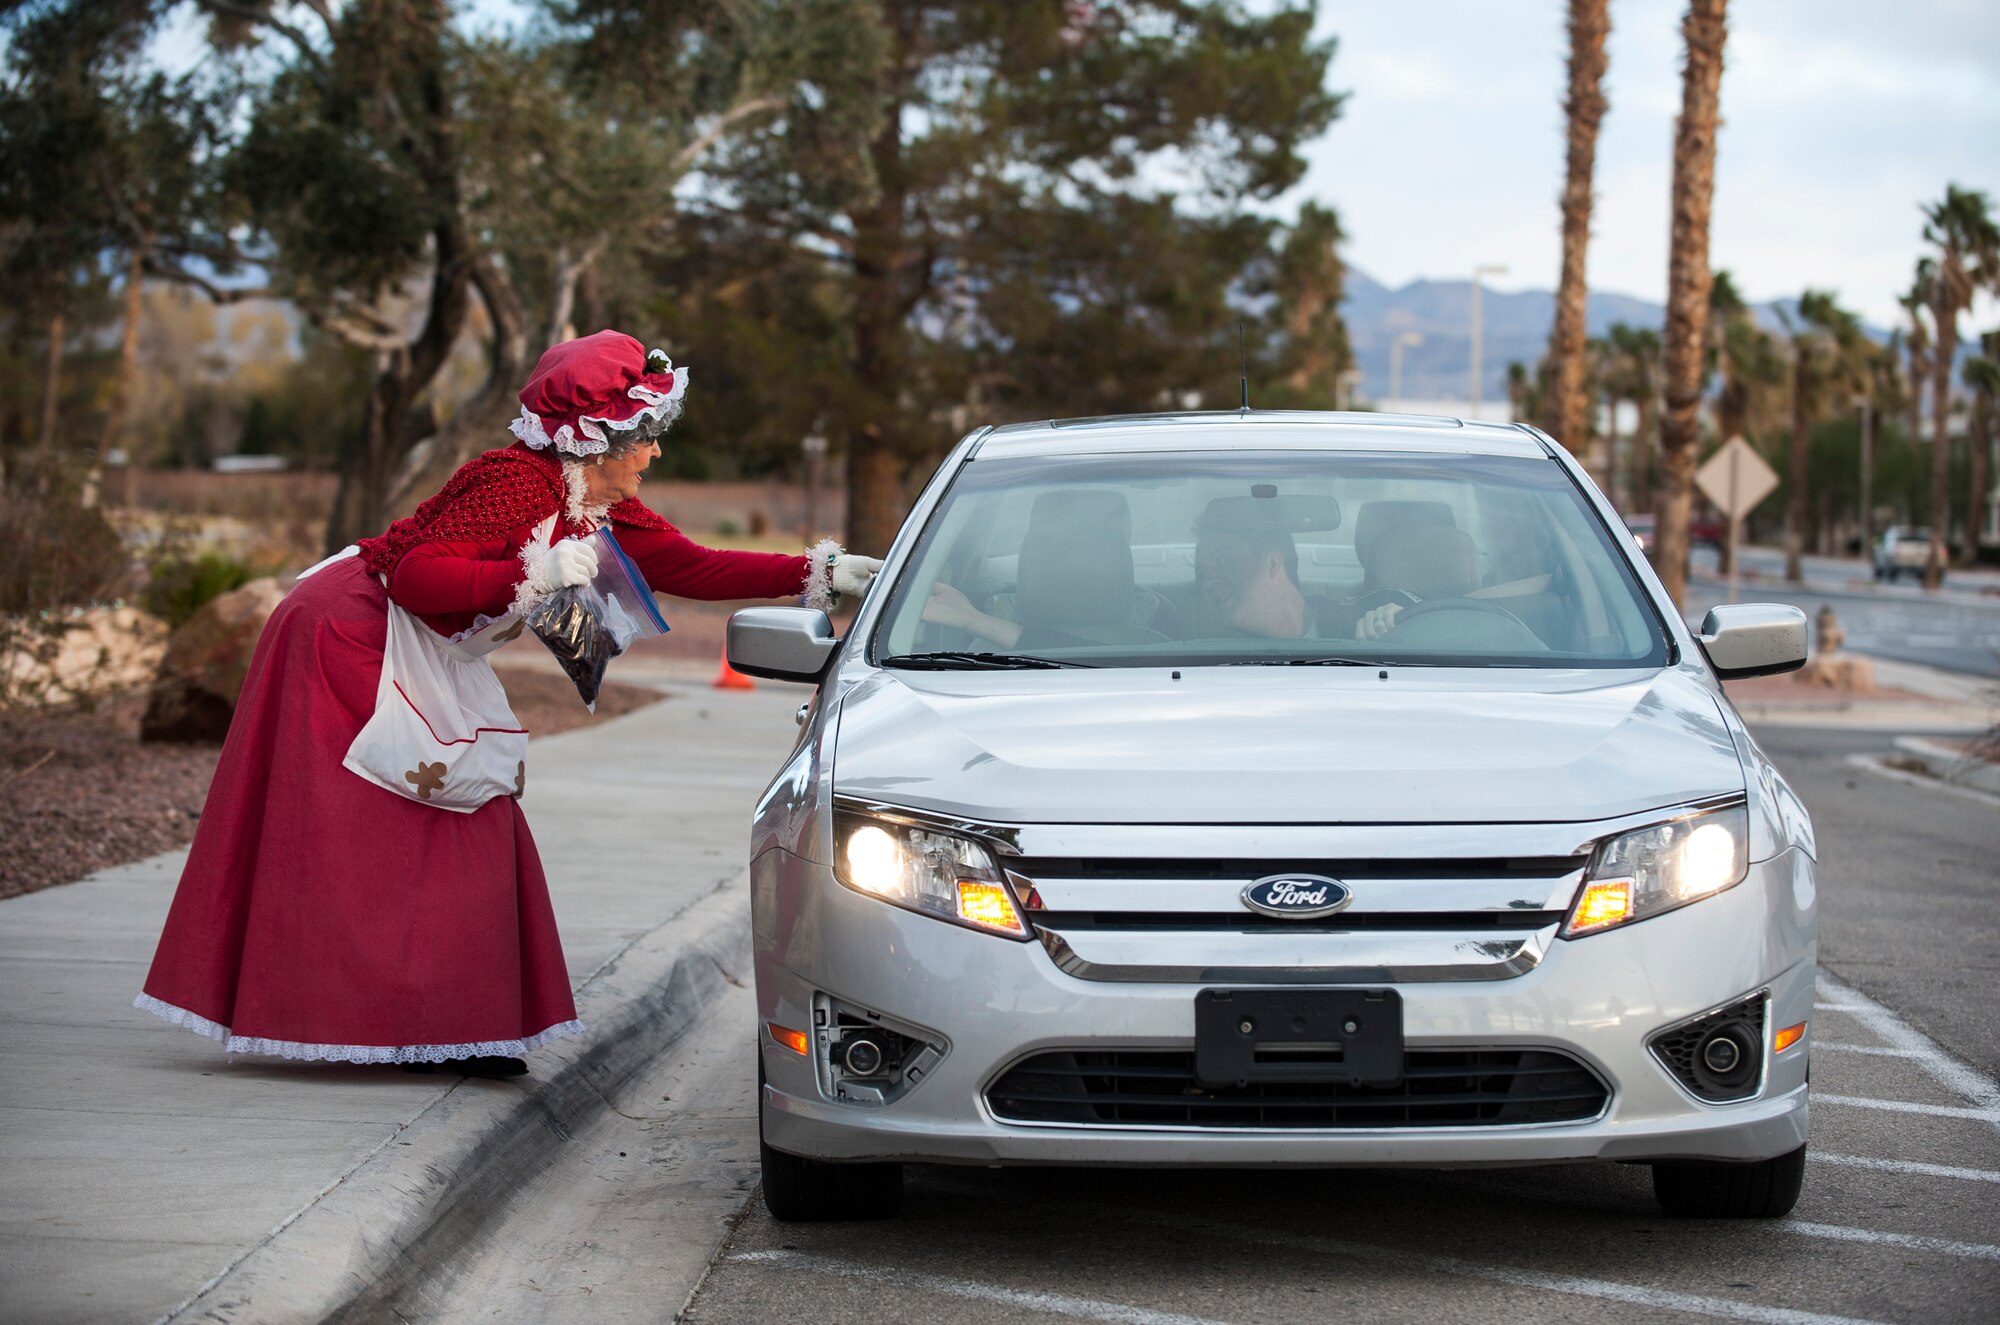 Margie Manning (left), a volunteer in the Airman Cookie Drive, collects cookies from a driver during the cookie drive’s drop off at the chapel on Nellis Air Force Base, Nev., Dec. 14, 2015. The Airman Cookie Drive is an annual event where Airmen living in Nellis AFB dormitories receive cookies and other homemade treats as a way to say thank you for the work they provide throughout the year. (U.S. Air Force photo by Staff Sgt. Siuta B. Ika)